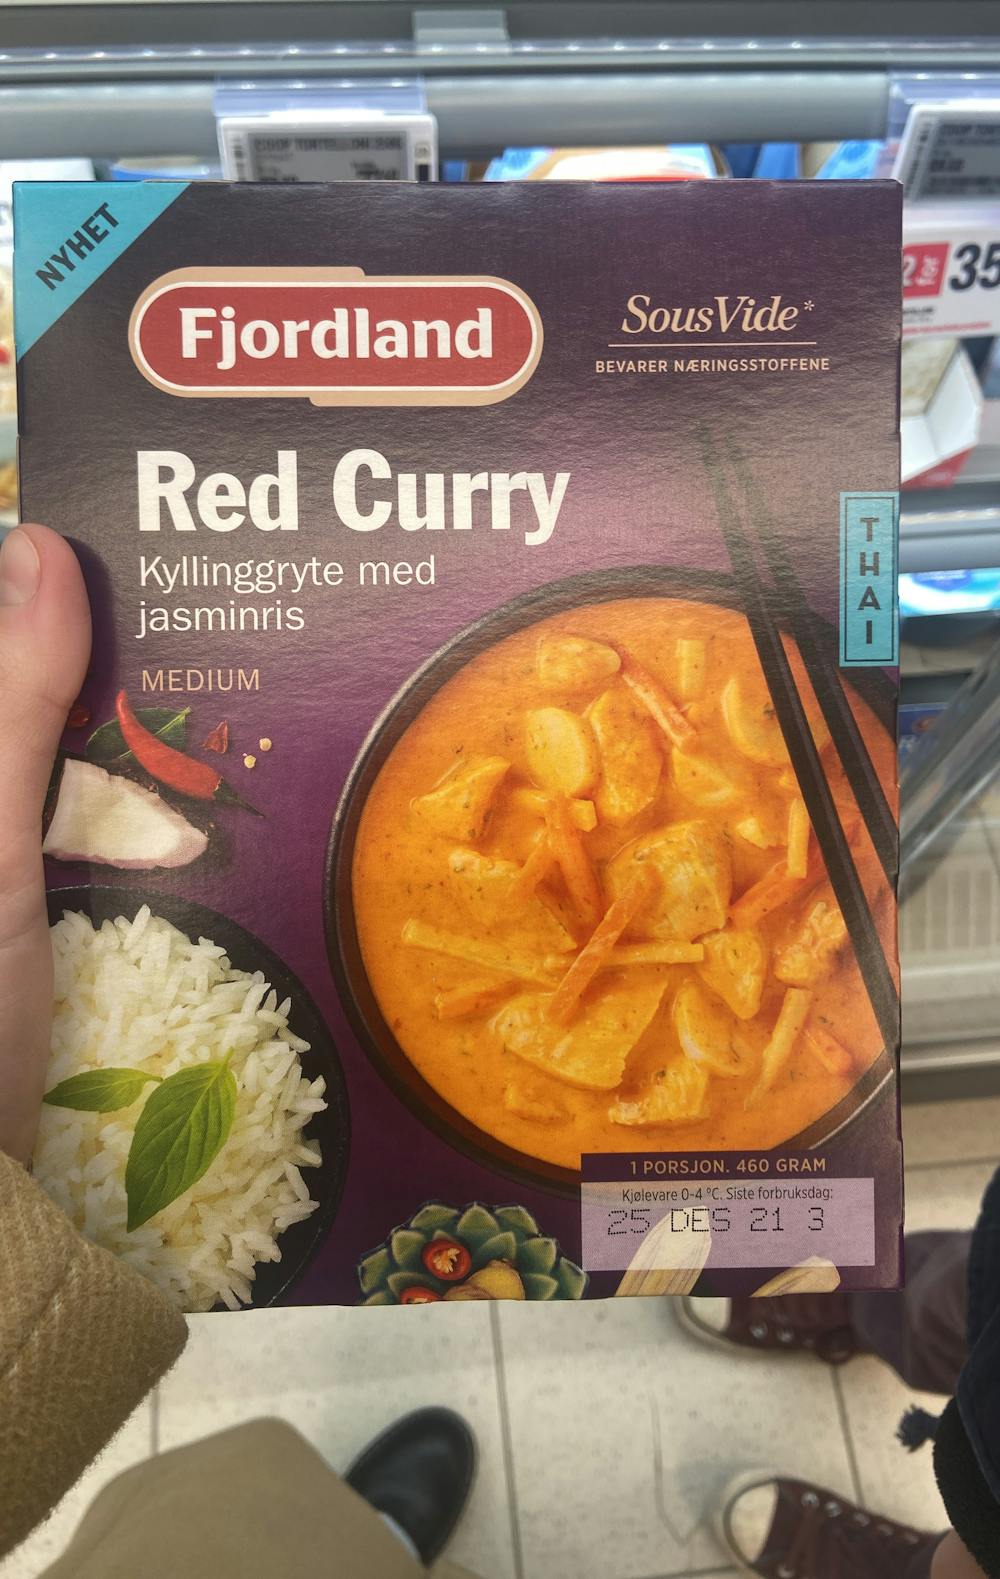 Red curry, Fjordland